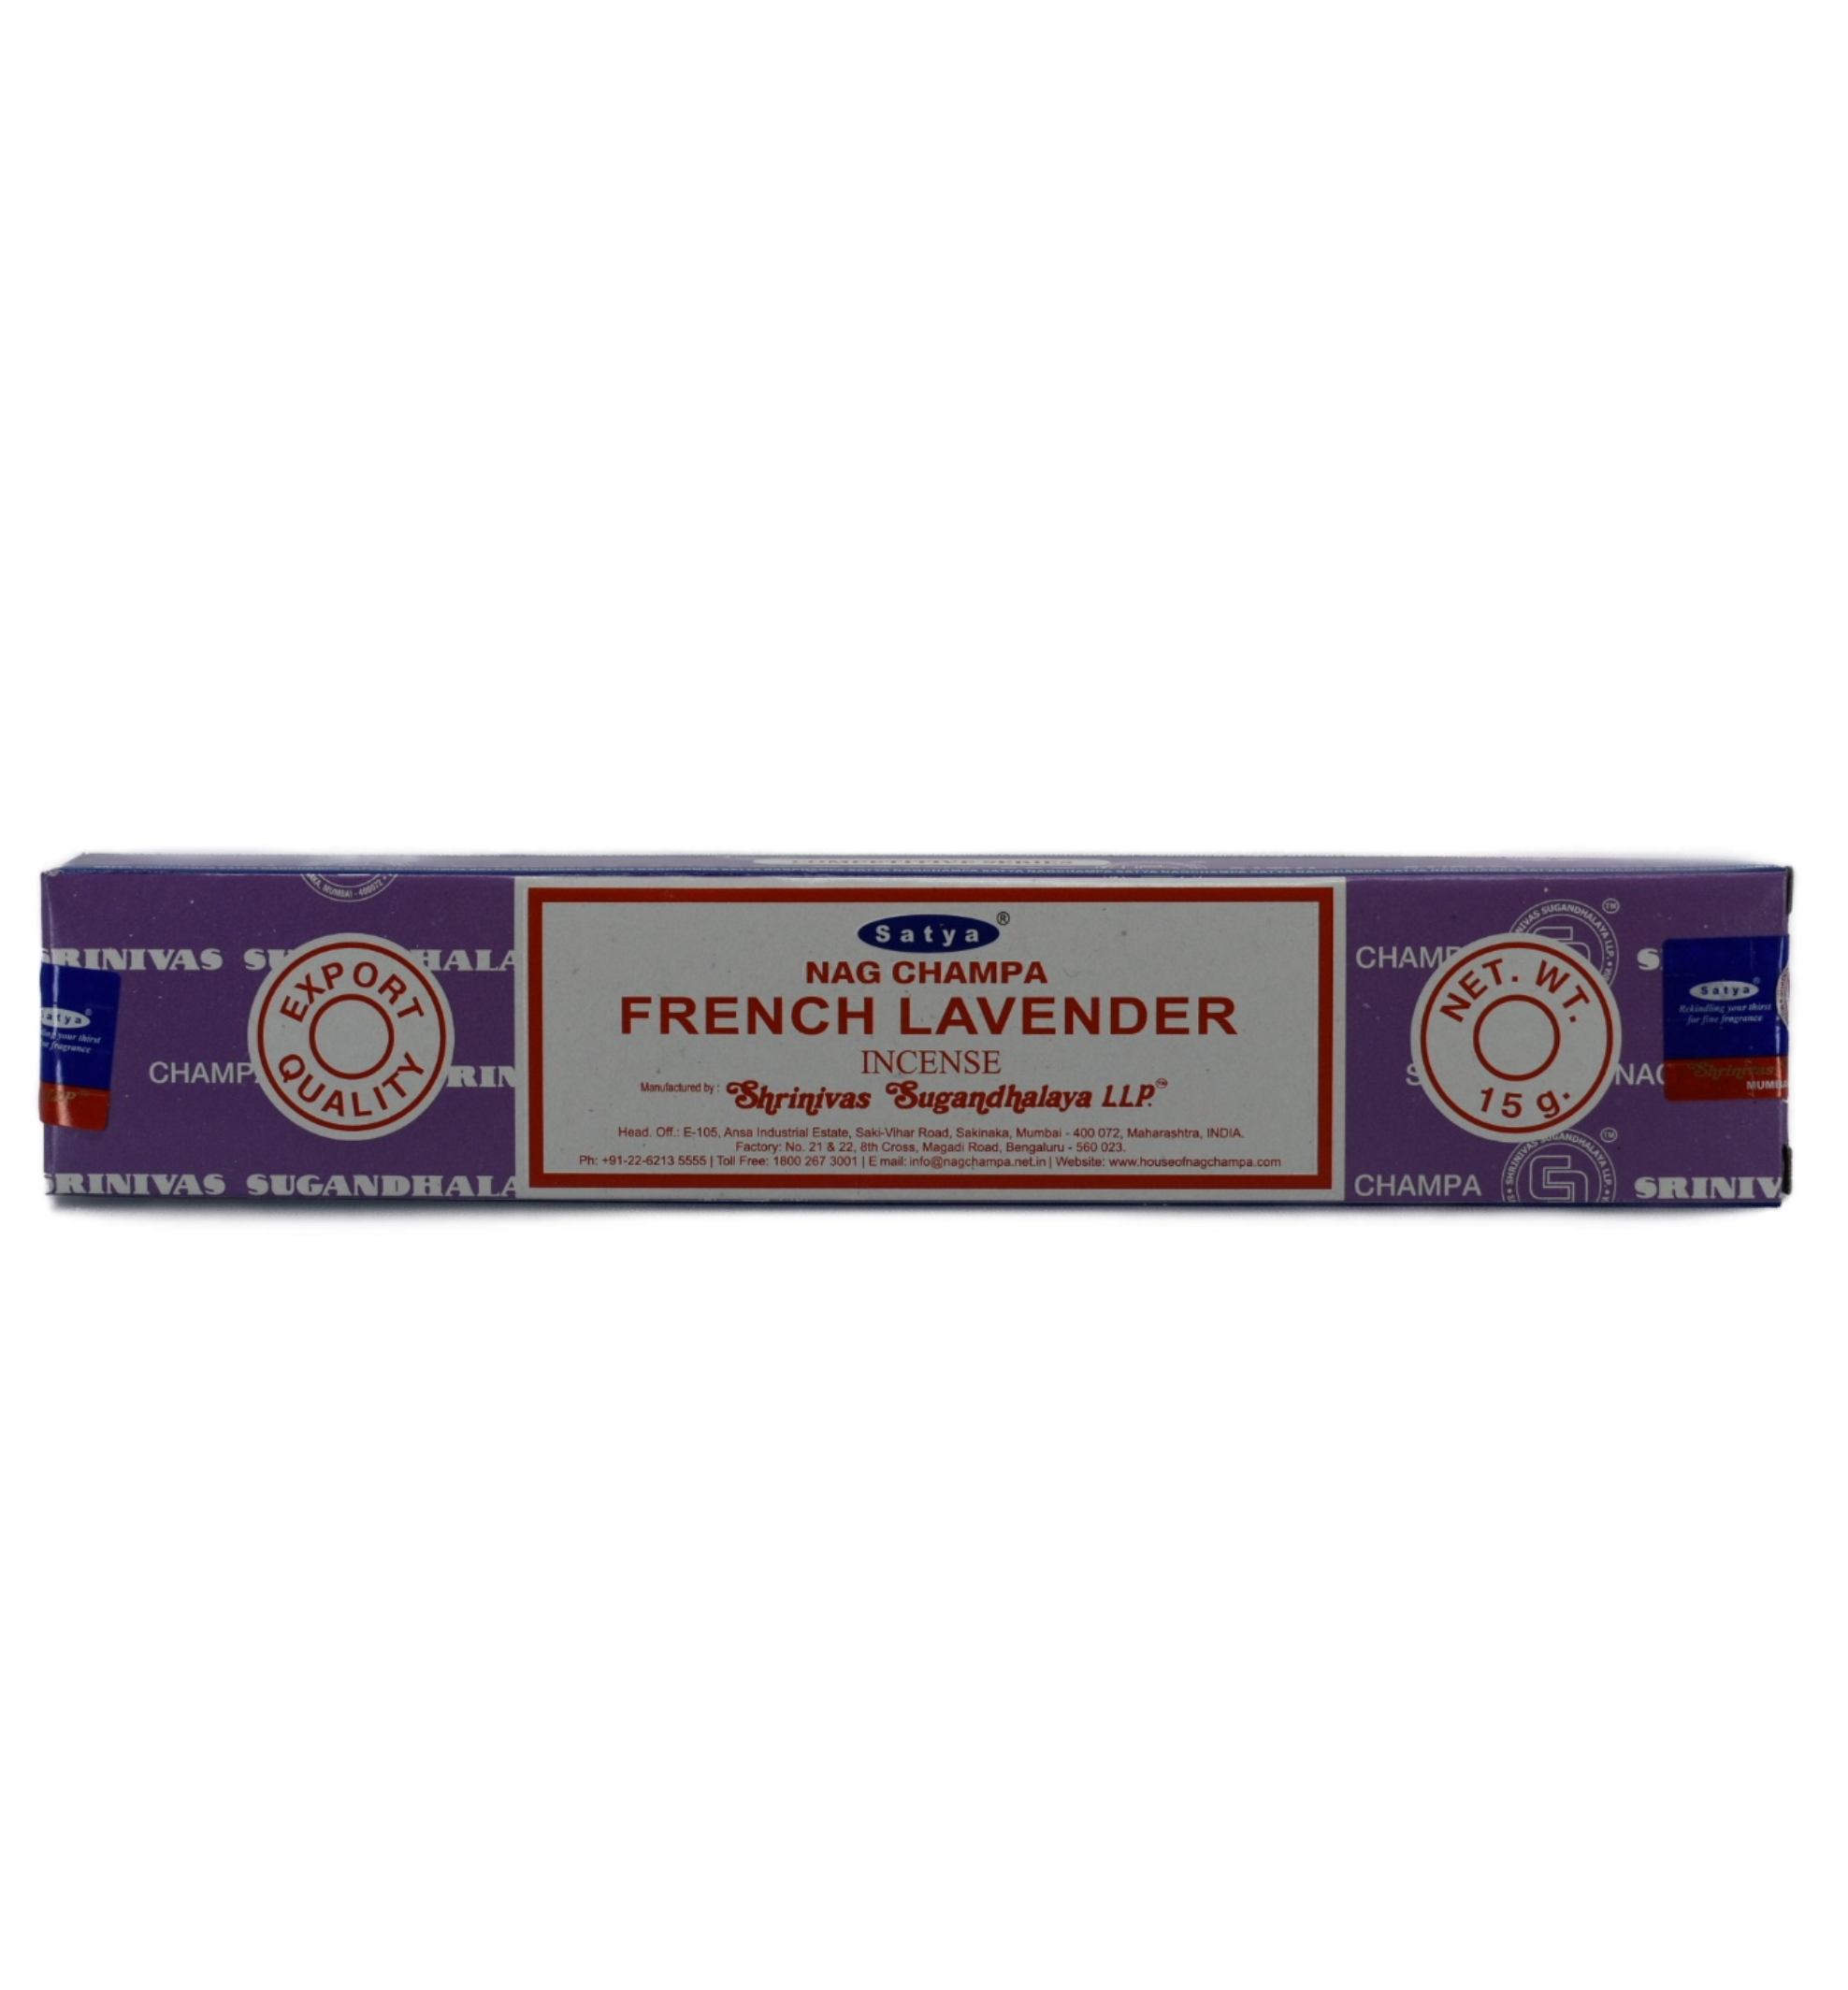 French Lavender Incense Sticks. The box is lavender with a design of stripes made of company words. The rectangler white box in the center has a red frame within the border. Inside the box it says Sayta, Nag Champa, French Lavender Incense. Below that is the manufacturer&